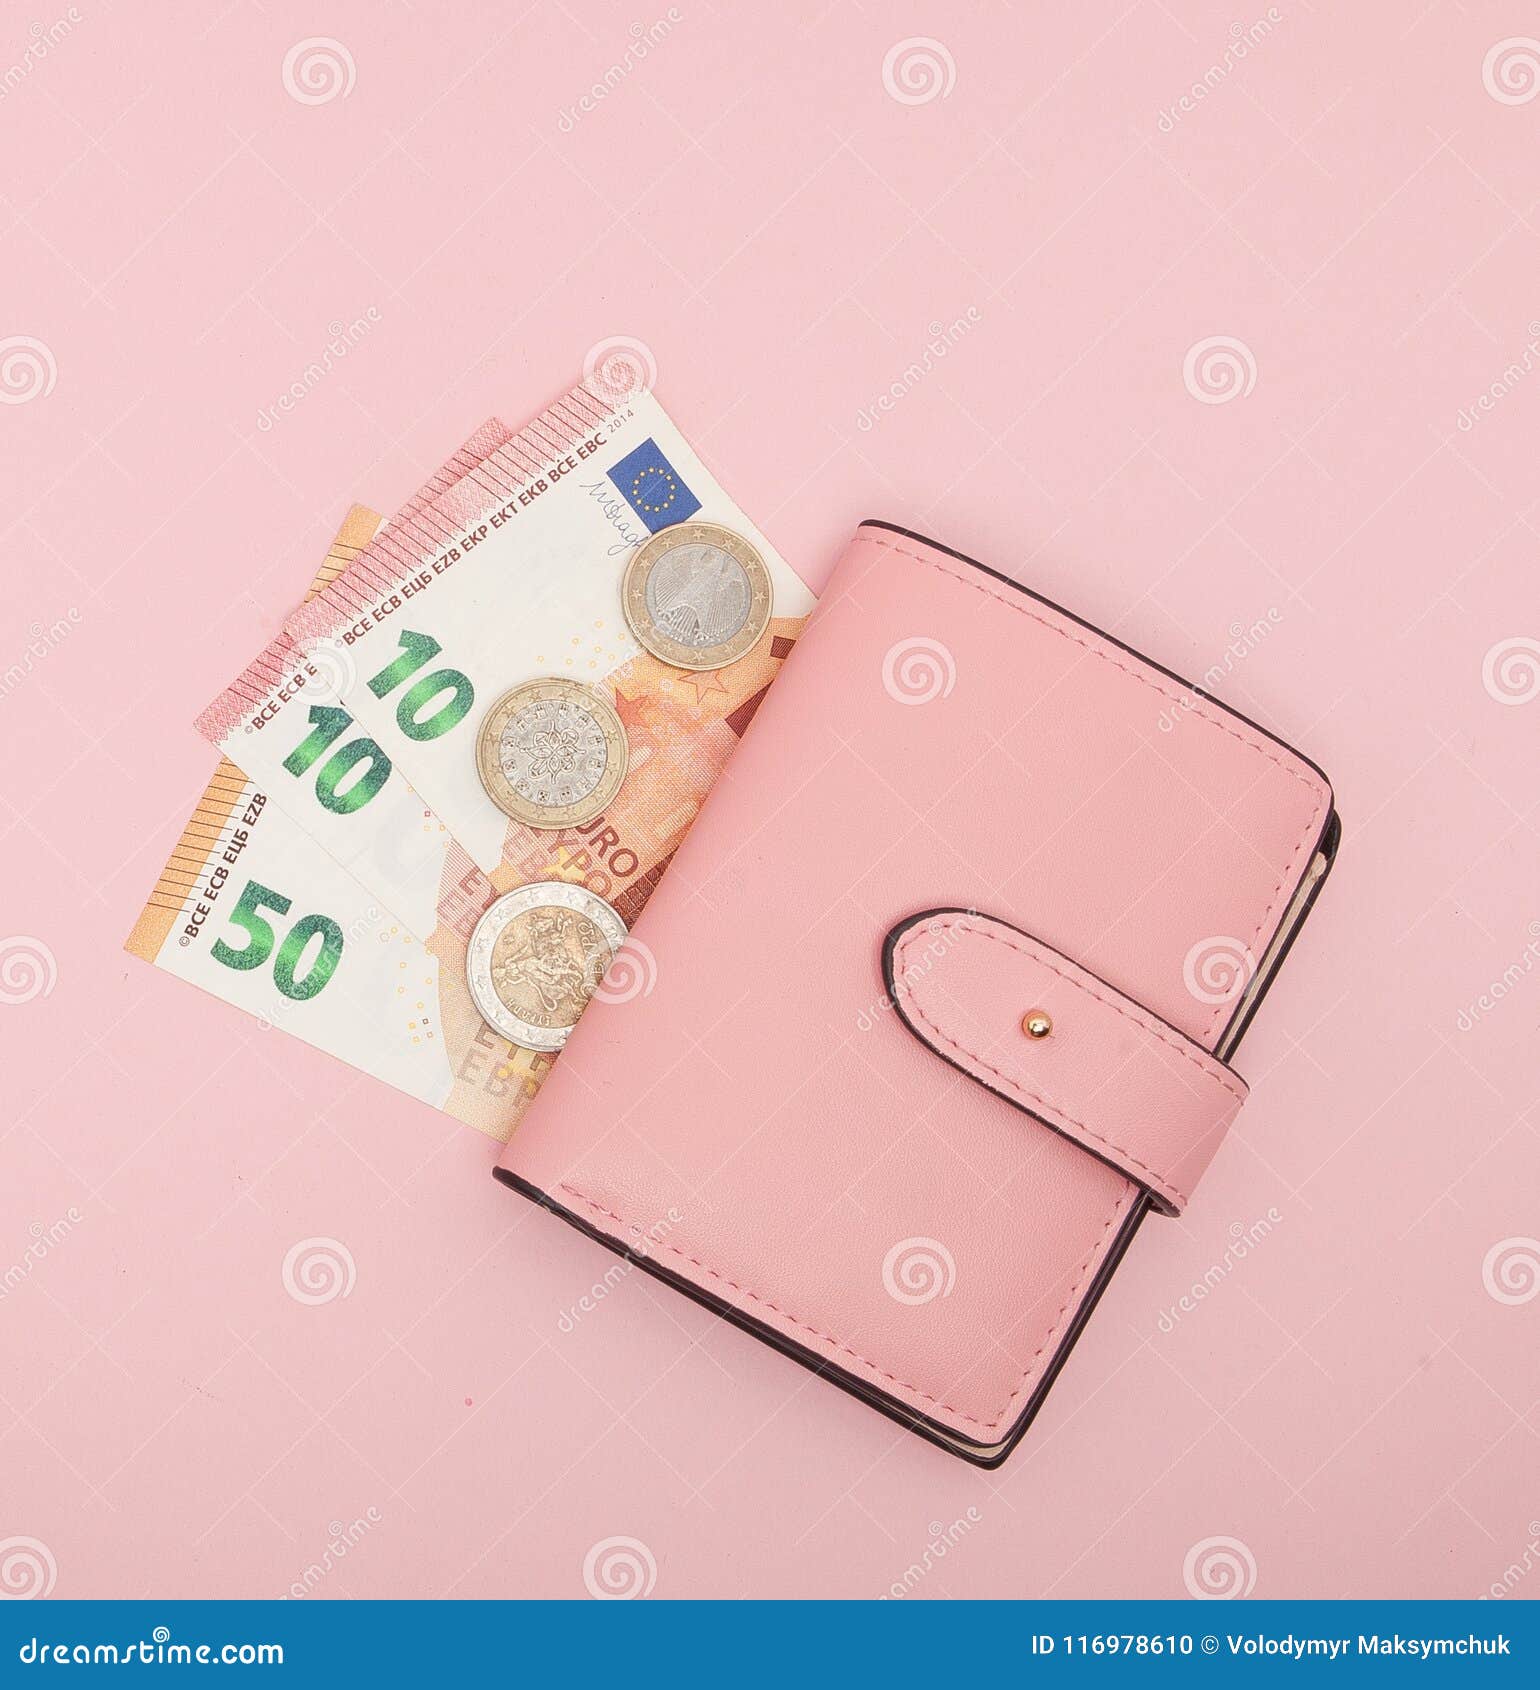 Wallet With Euro Currency On A Vibrant Blue Background. Business Concept And Instagram Stock ...